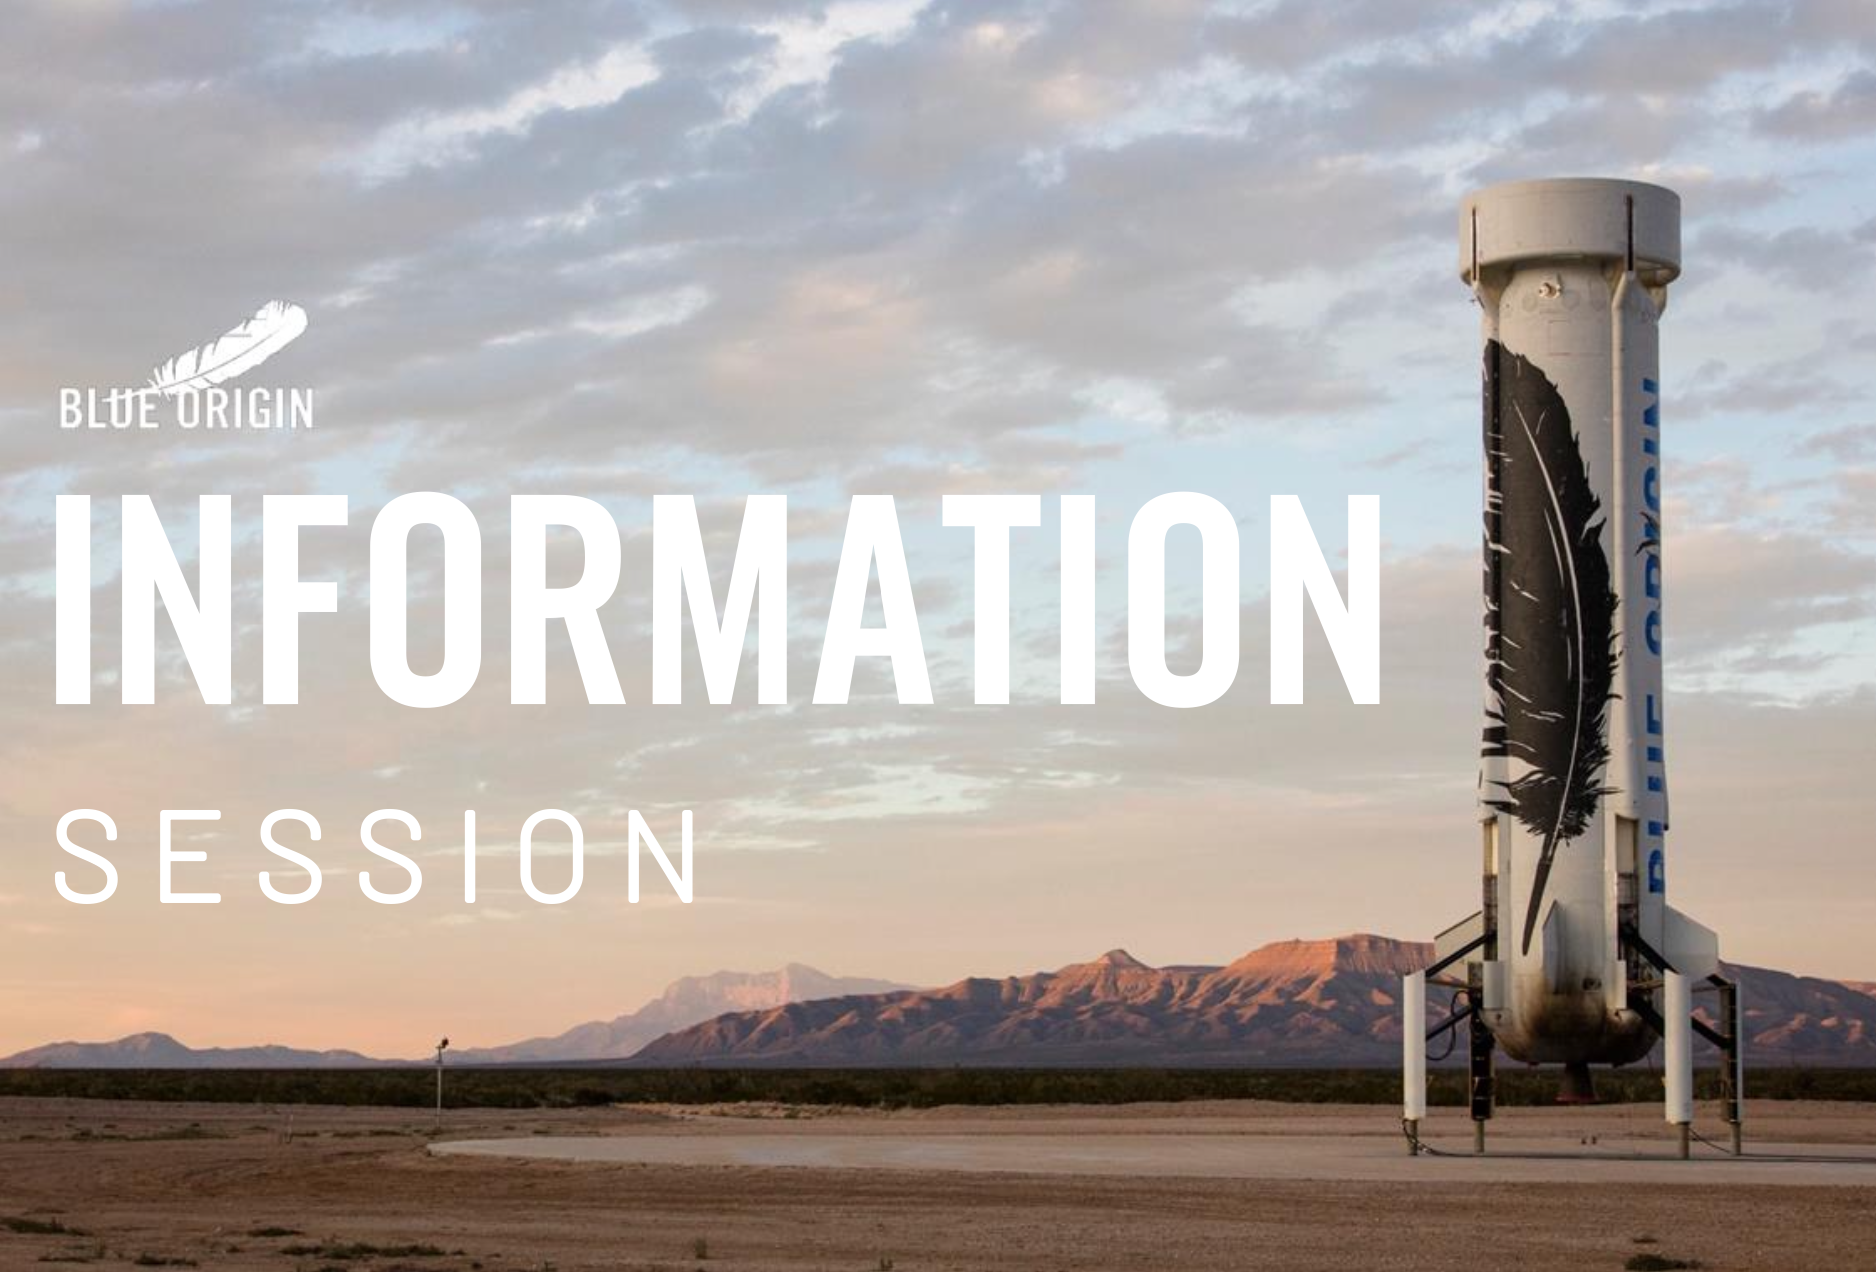 Photo of a rocket on a desert landscape with the words "Blue Origin information session" on it